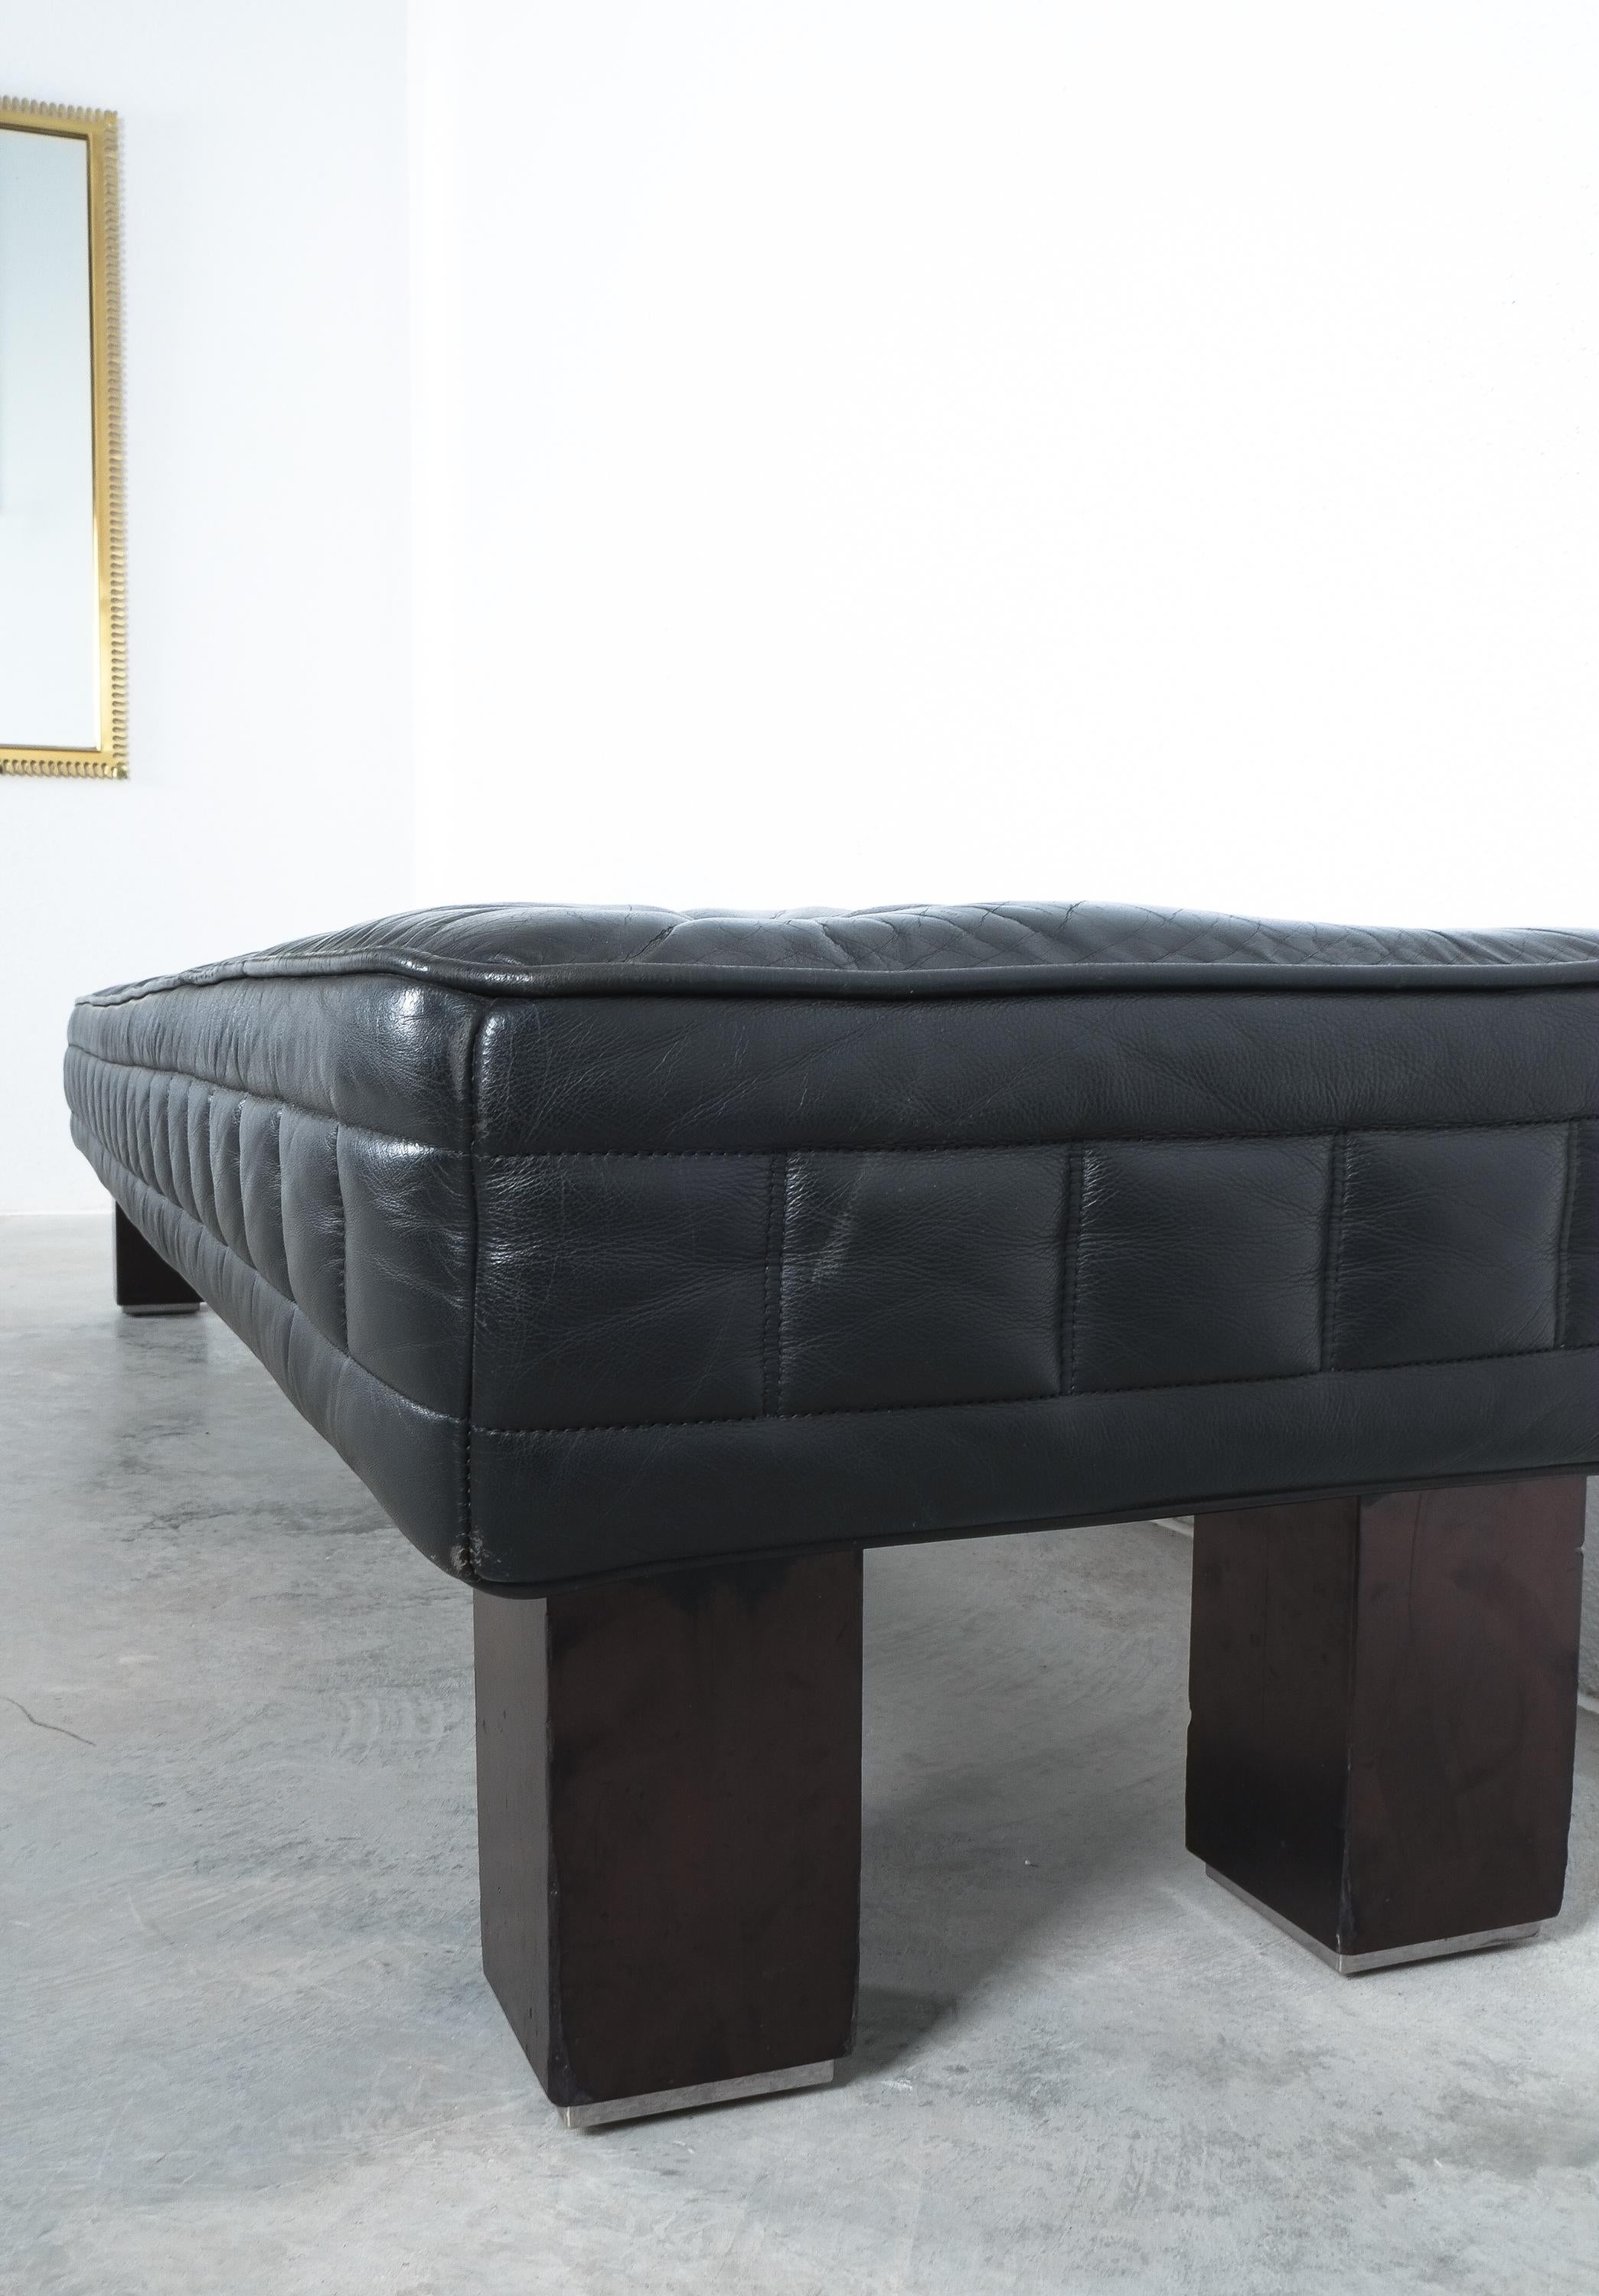 Matteo Thun Tufted Black Leather Banquettes (2 pieces) Bench Materassi, Wittmann In Good Condition For Sale In Vienna, AT